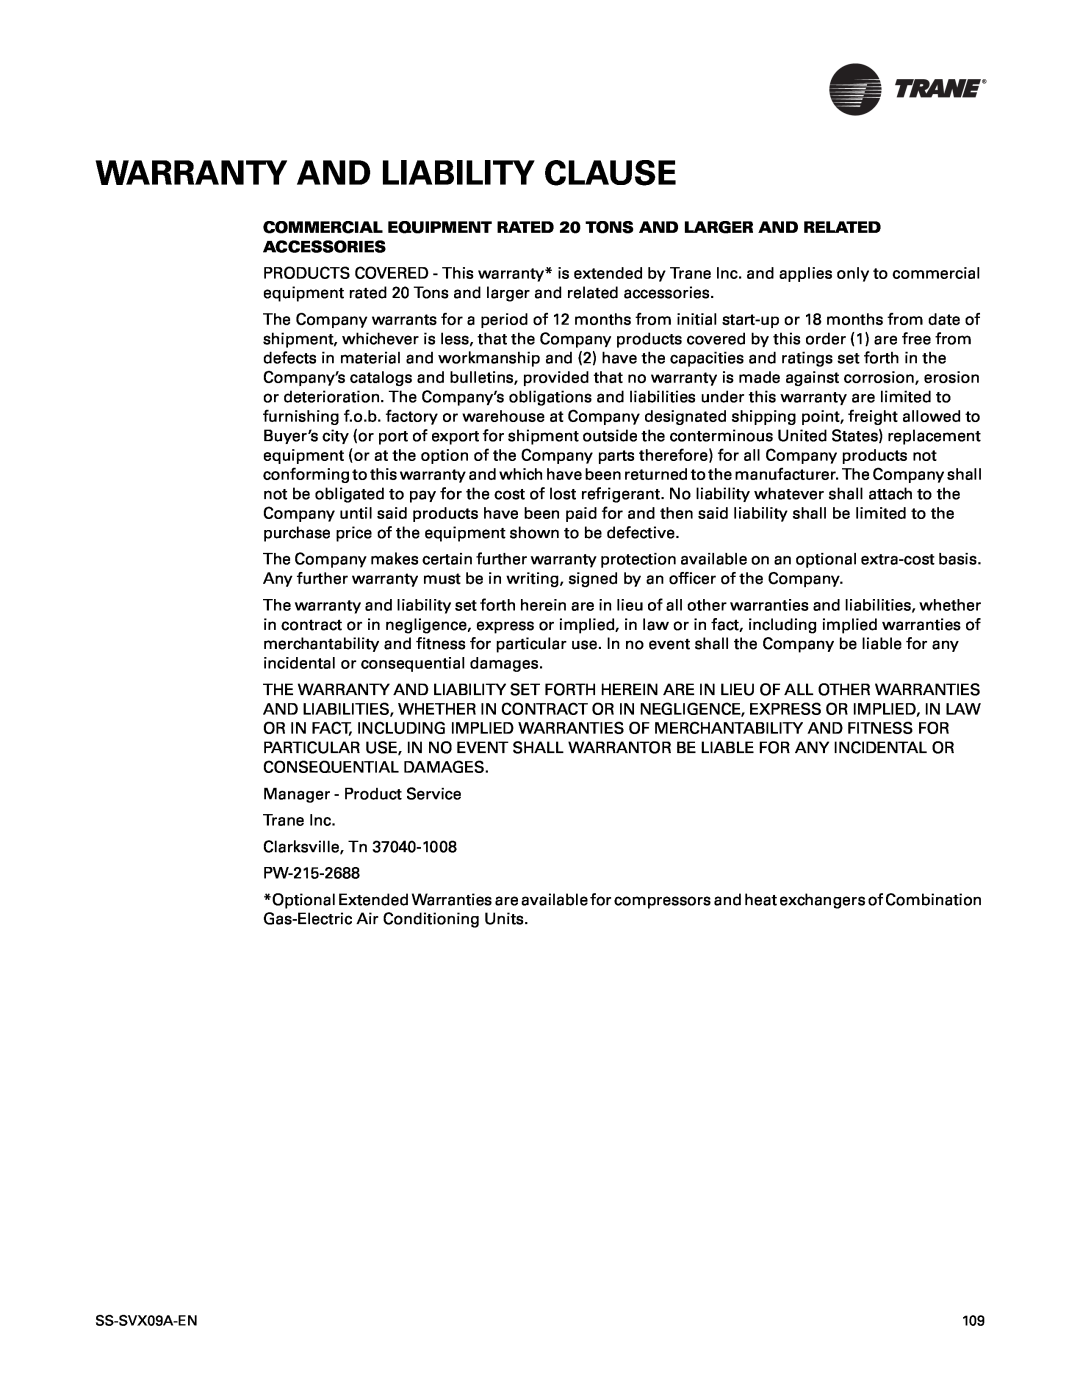 Trane RAUC-C30, RAUC-C50, RAUC-C60, RAUC-C20, RAUC-C40, RAUC-C25 manual Warranty And Liability Clause, Accessories 